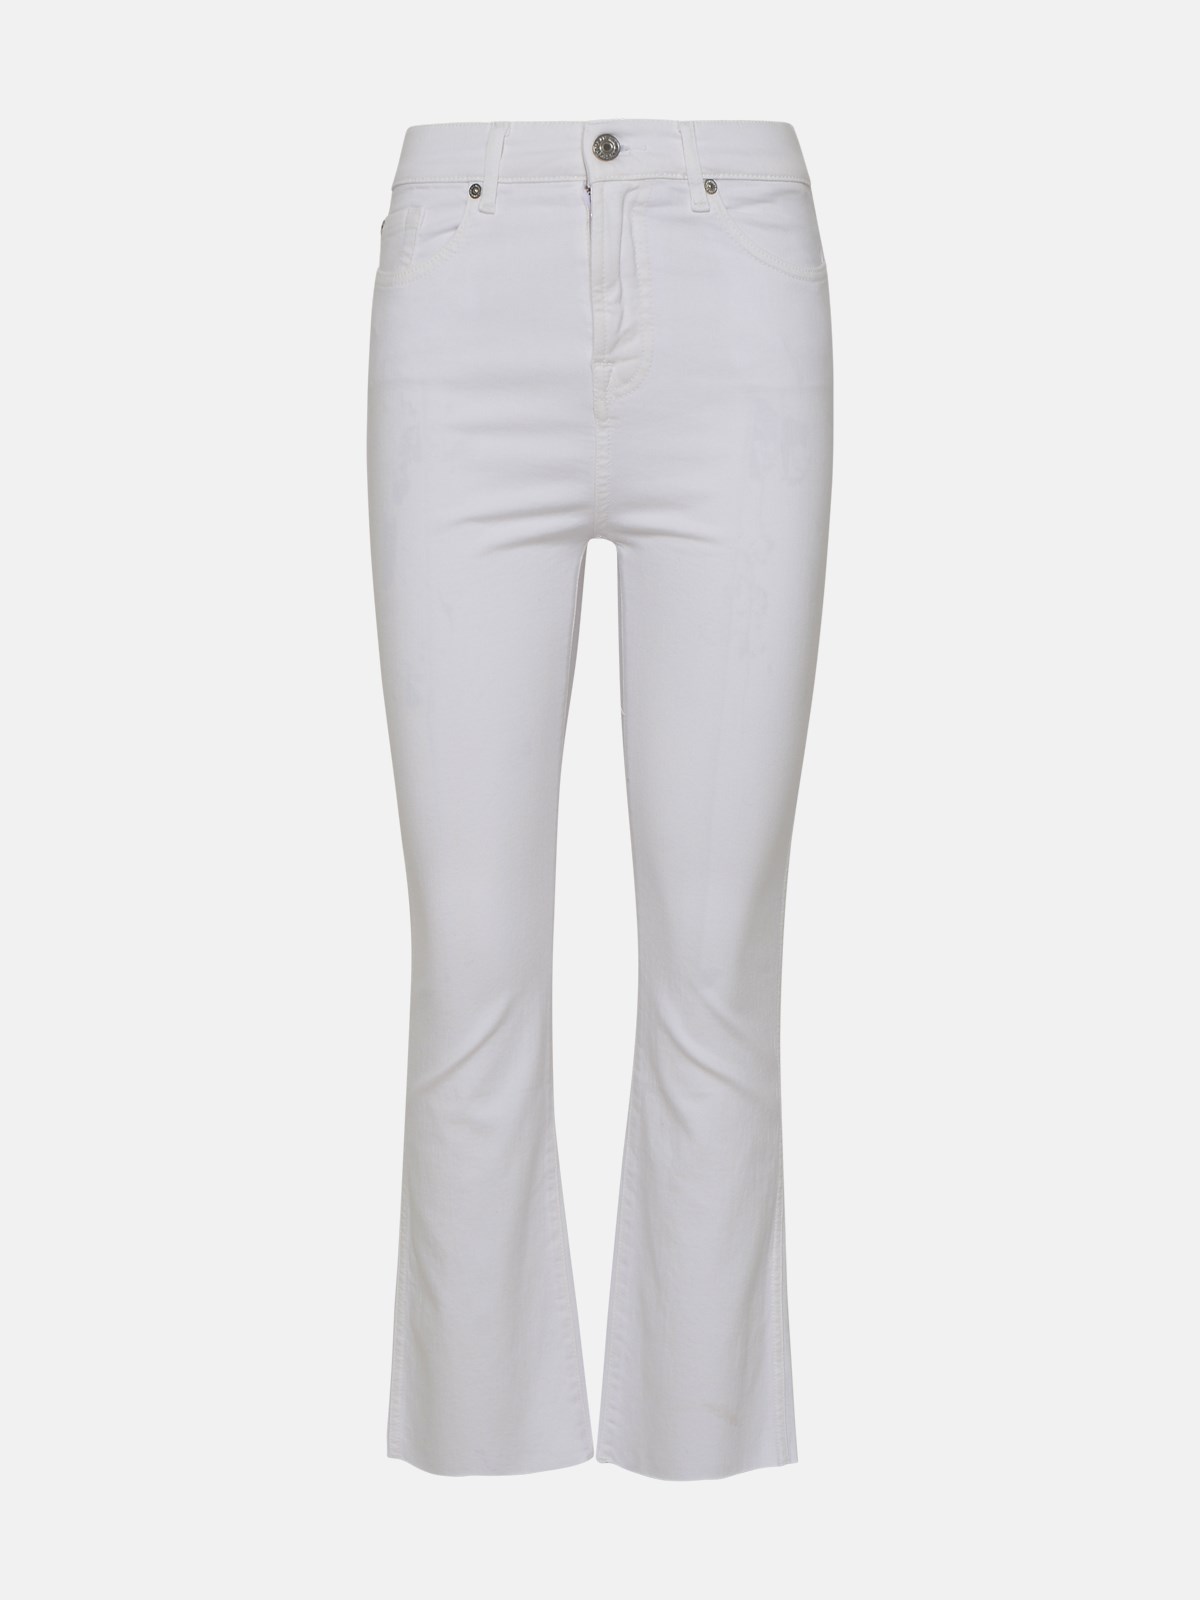 7 For All Mankind White Cotton Dneim Jeans